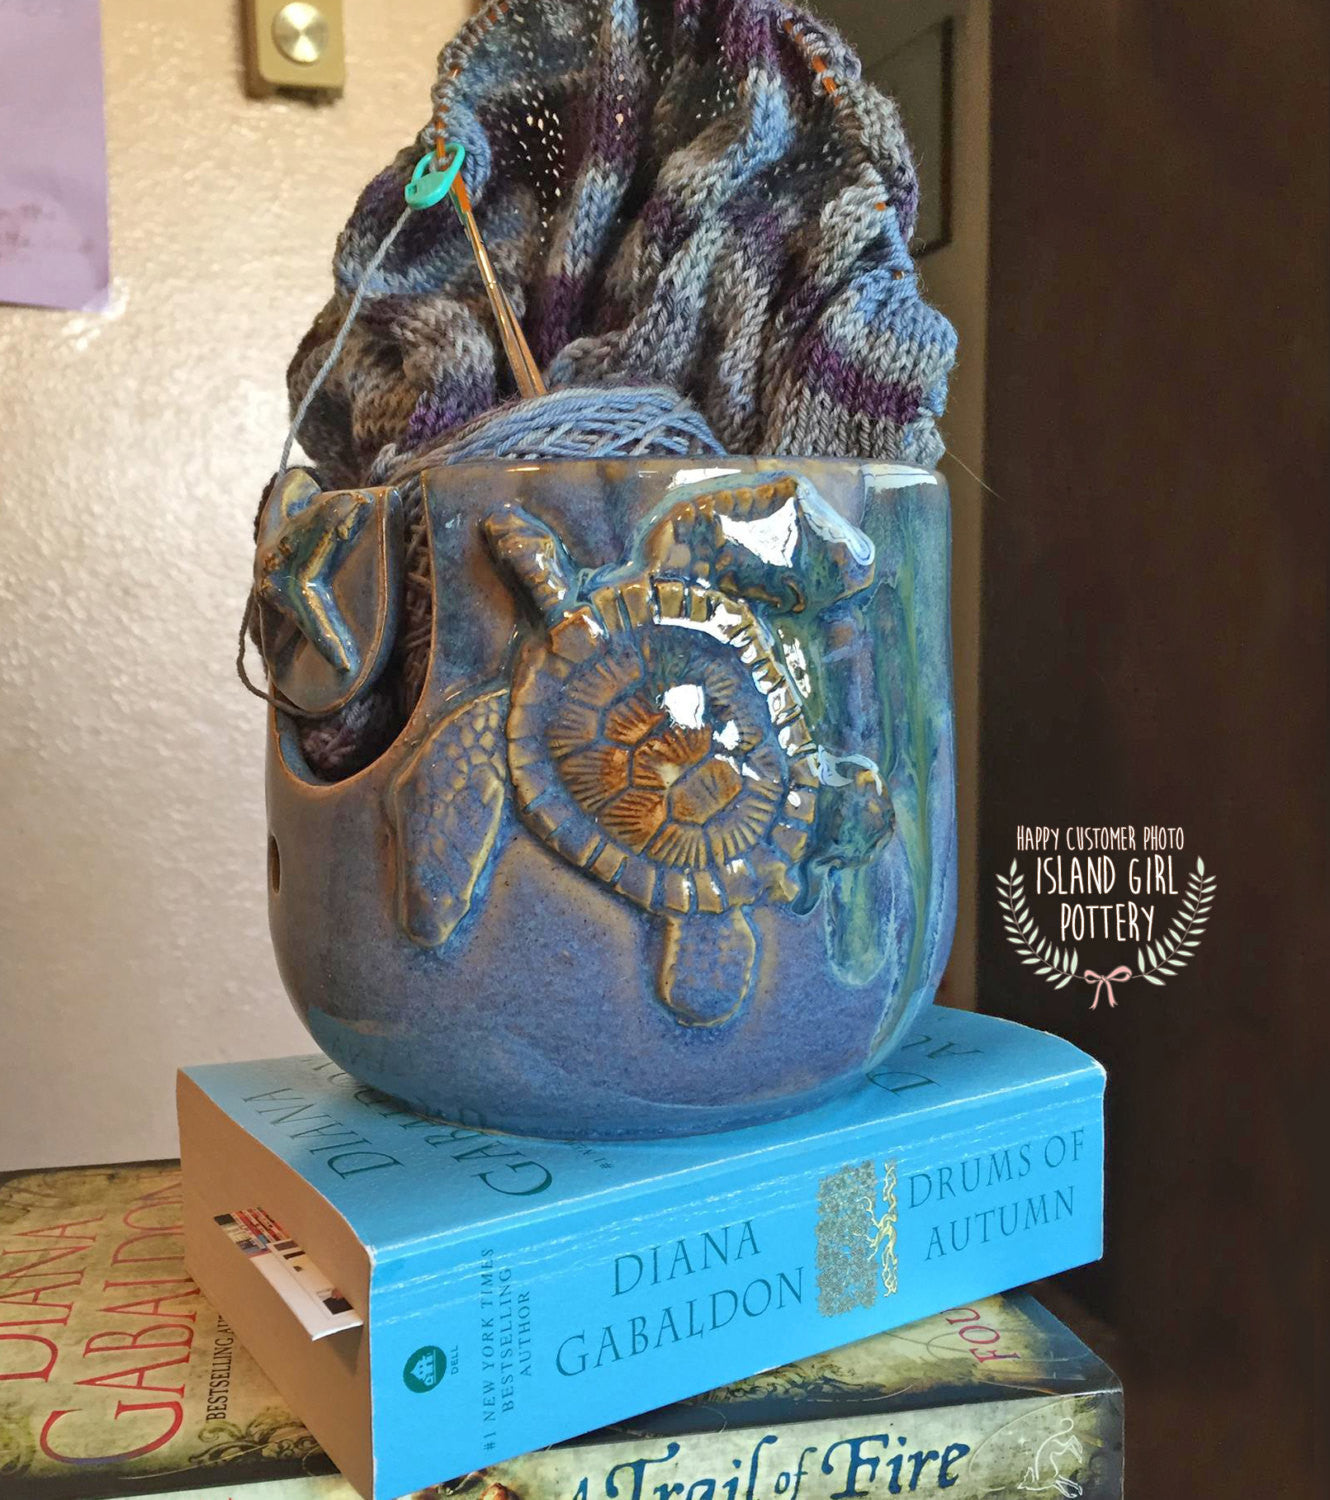 Sea Turtle Yarn Bowl for Knitting and Crochet